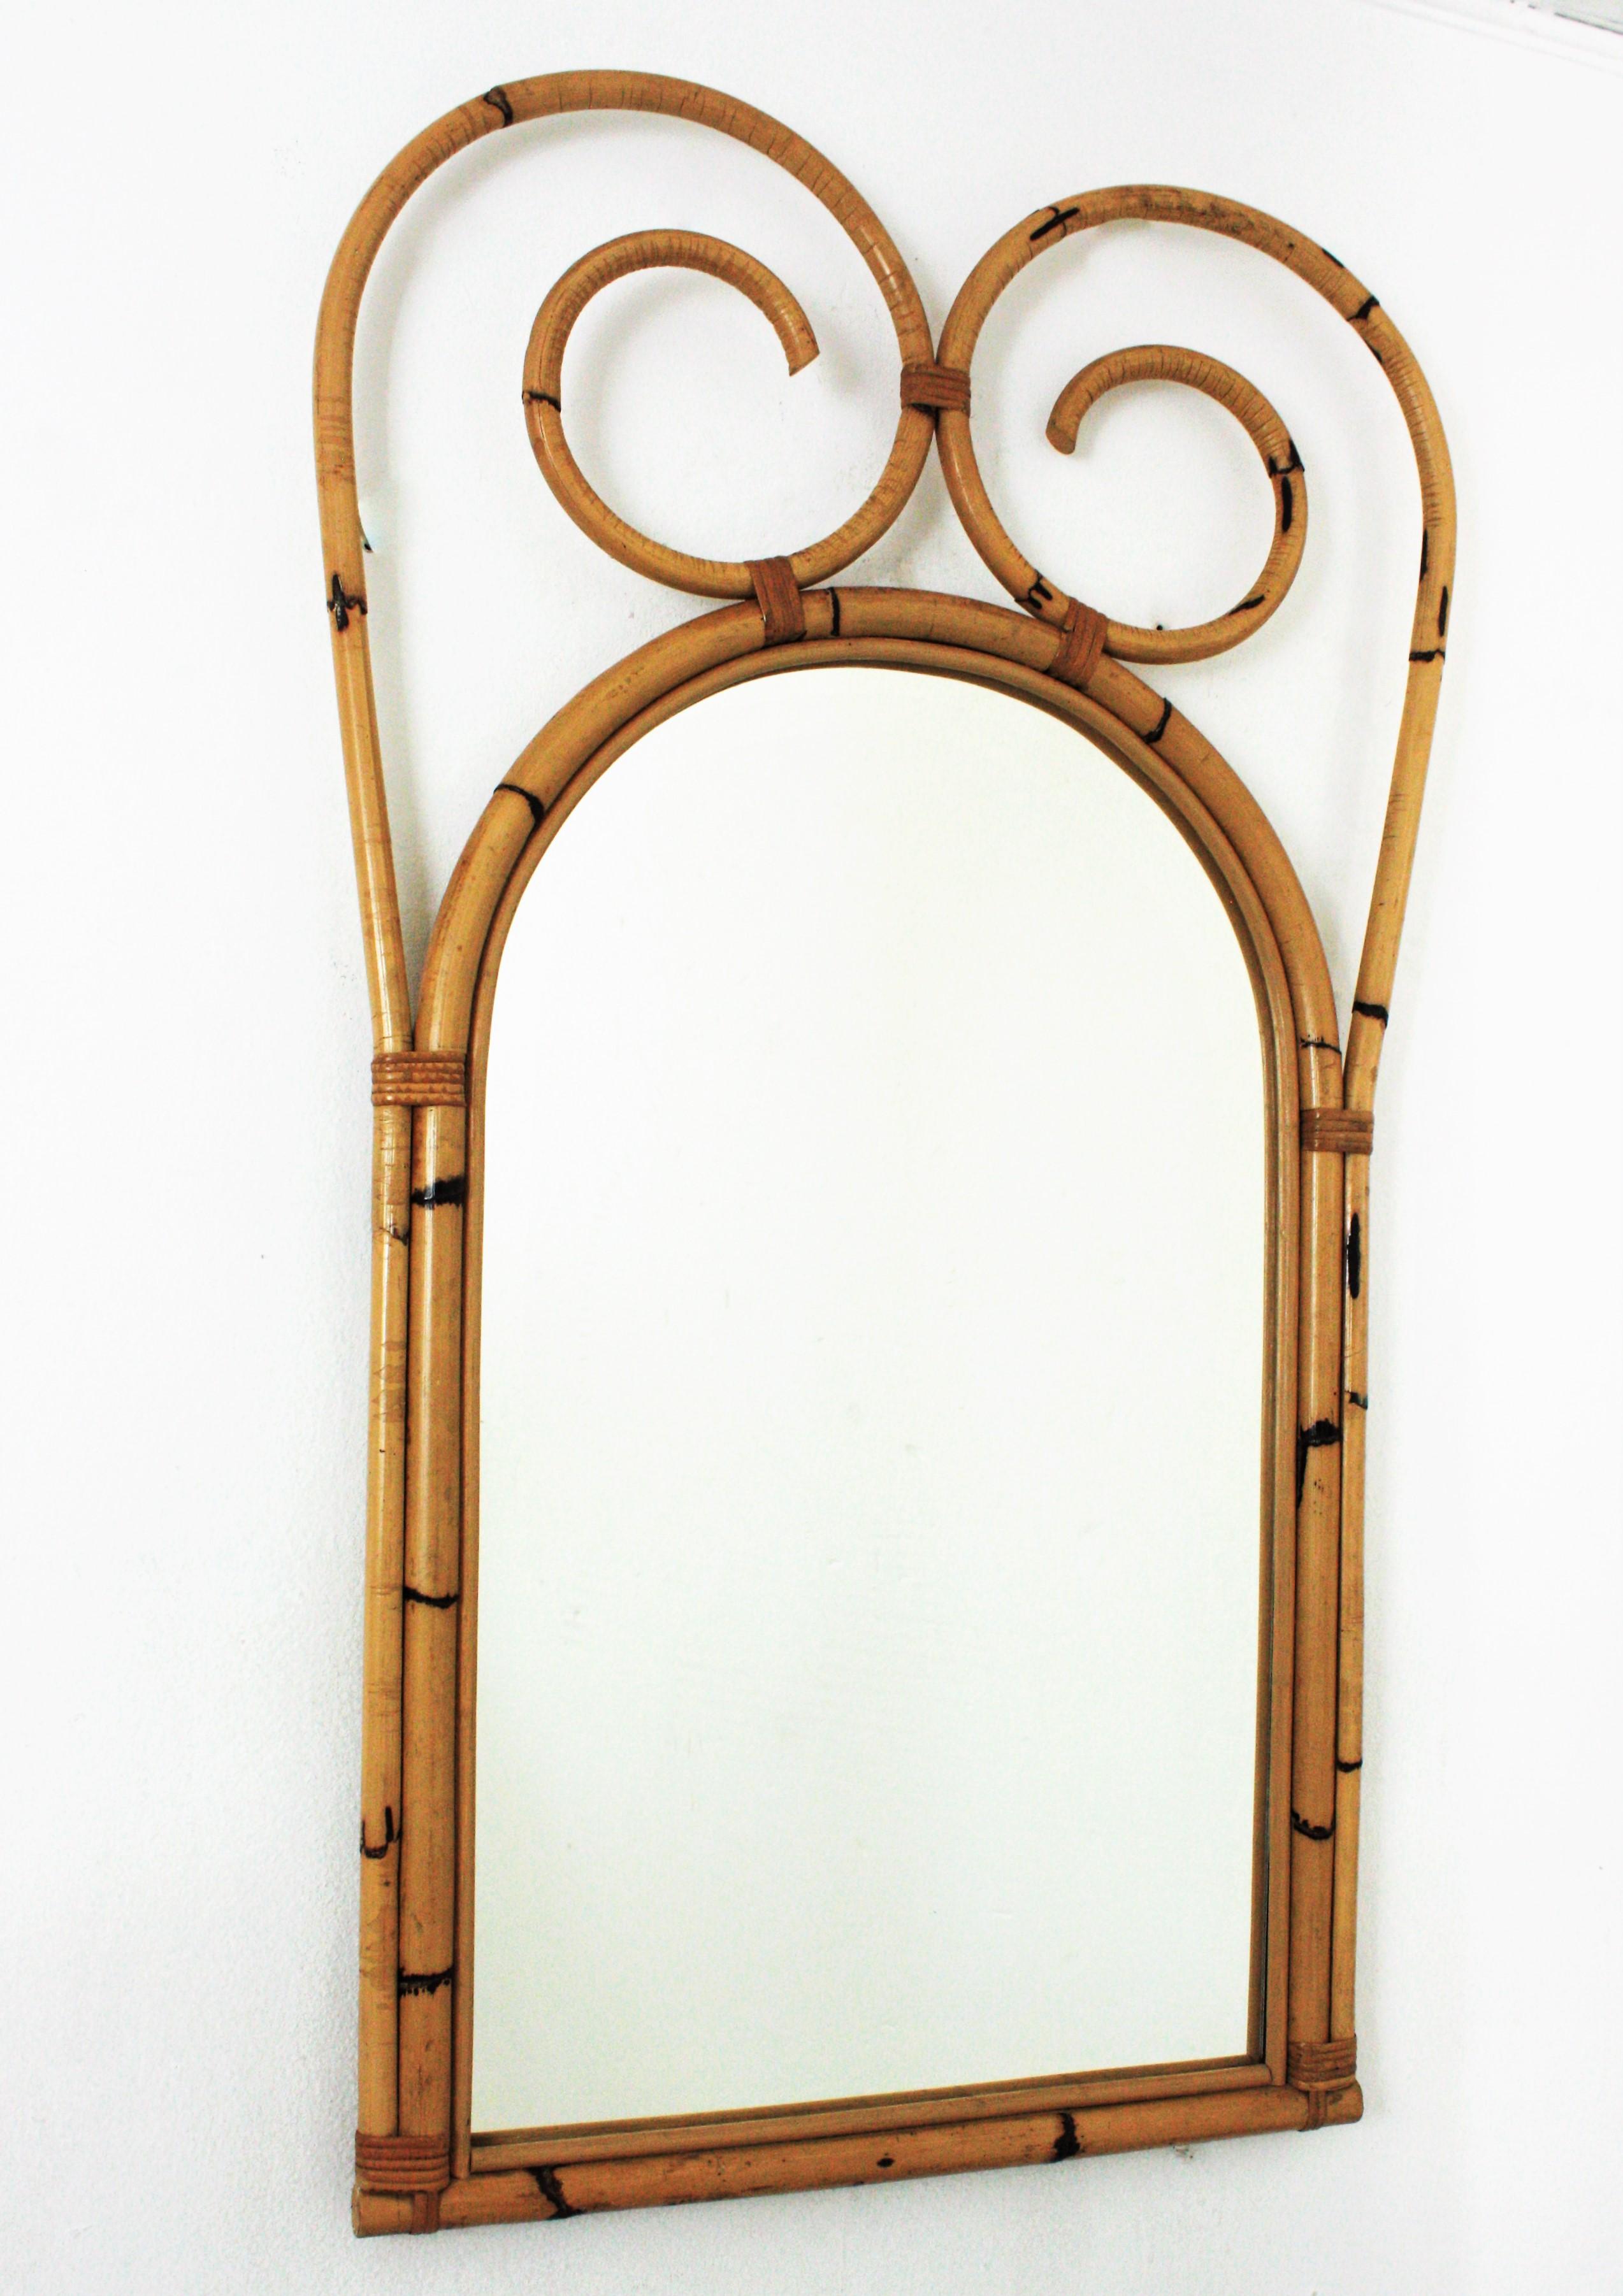 Outstanding large Rattan bamboo midcentury mirror. Italian manufacture, 1950s-1960s
This cool wall mirror features an arched bamboo mirror adorned with a big scroll shaped crest in rattan bamboo.
It will be a great choice for a beach house,